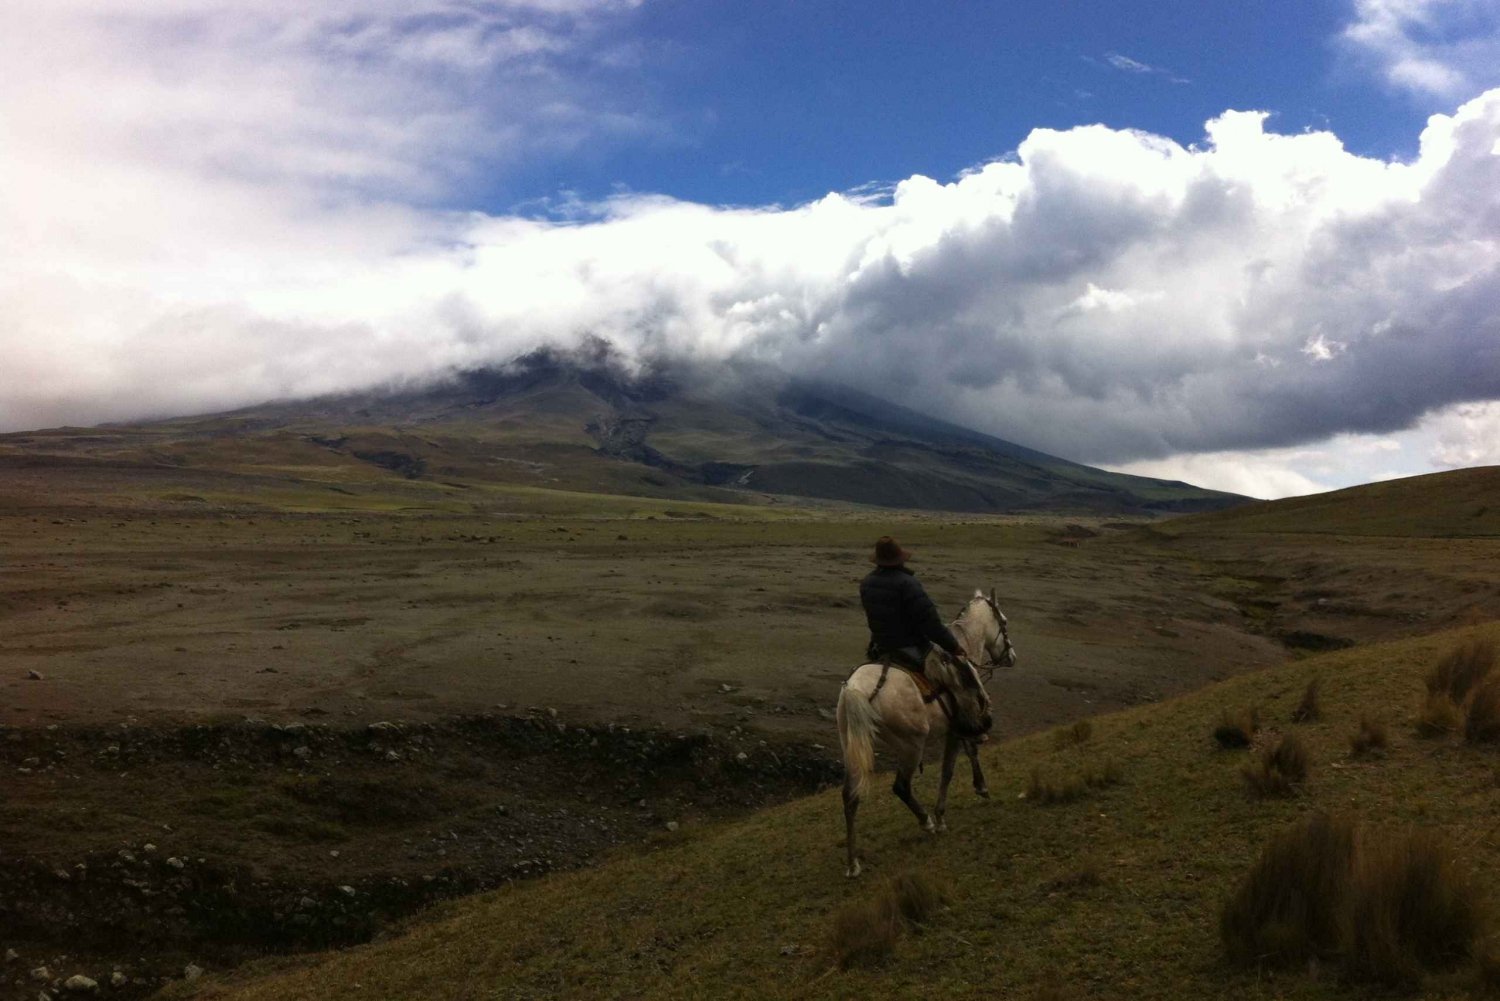 From Quito: Cotopaxi Hiking and Biking Tour